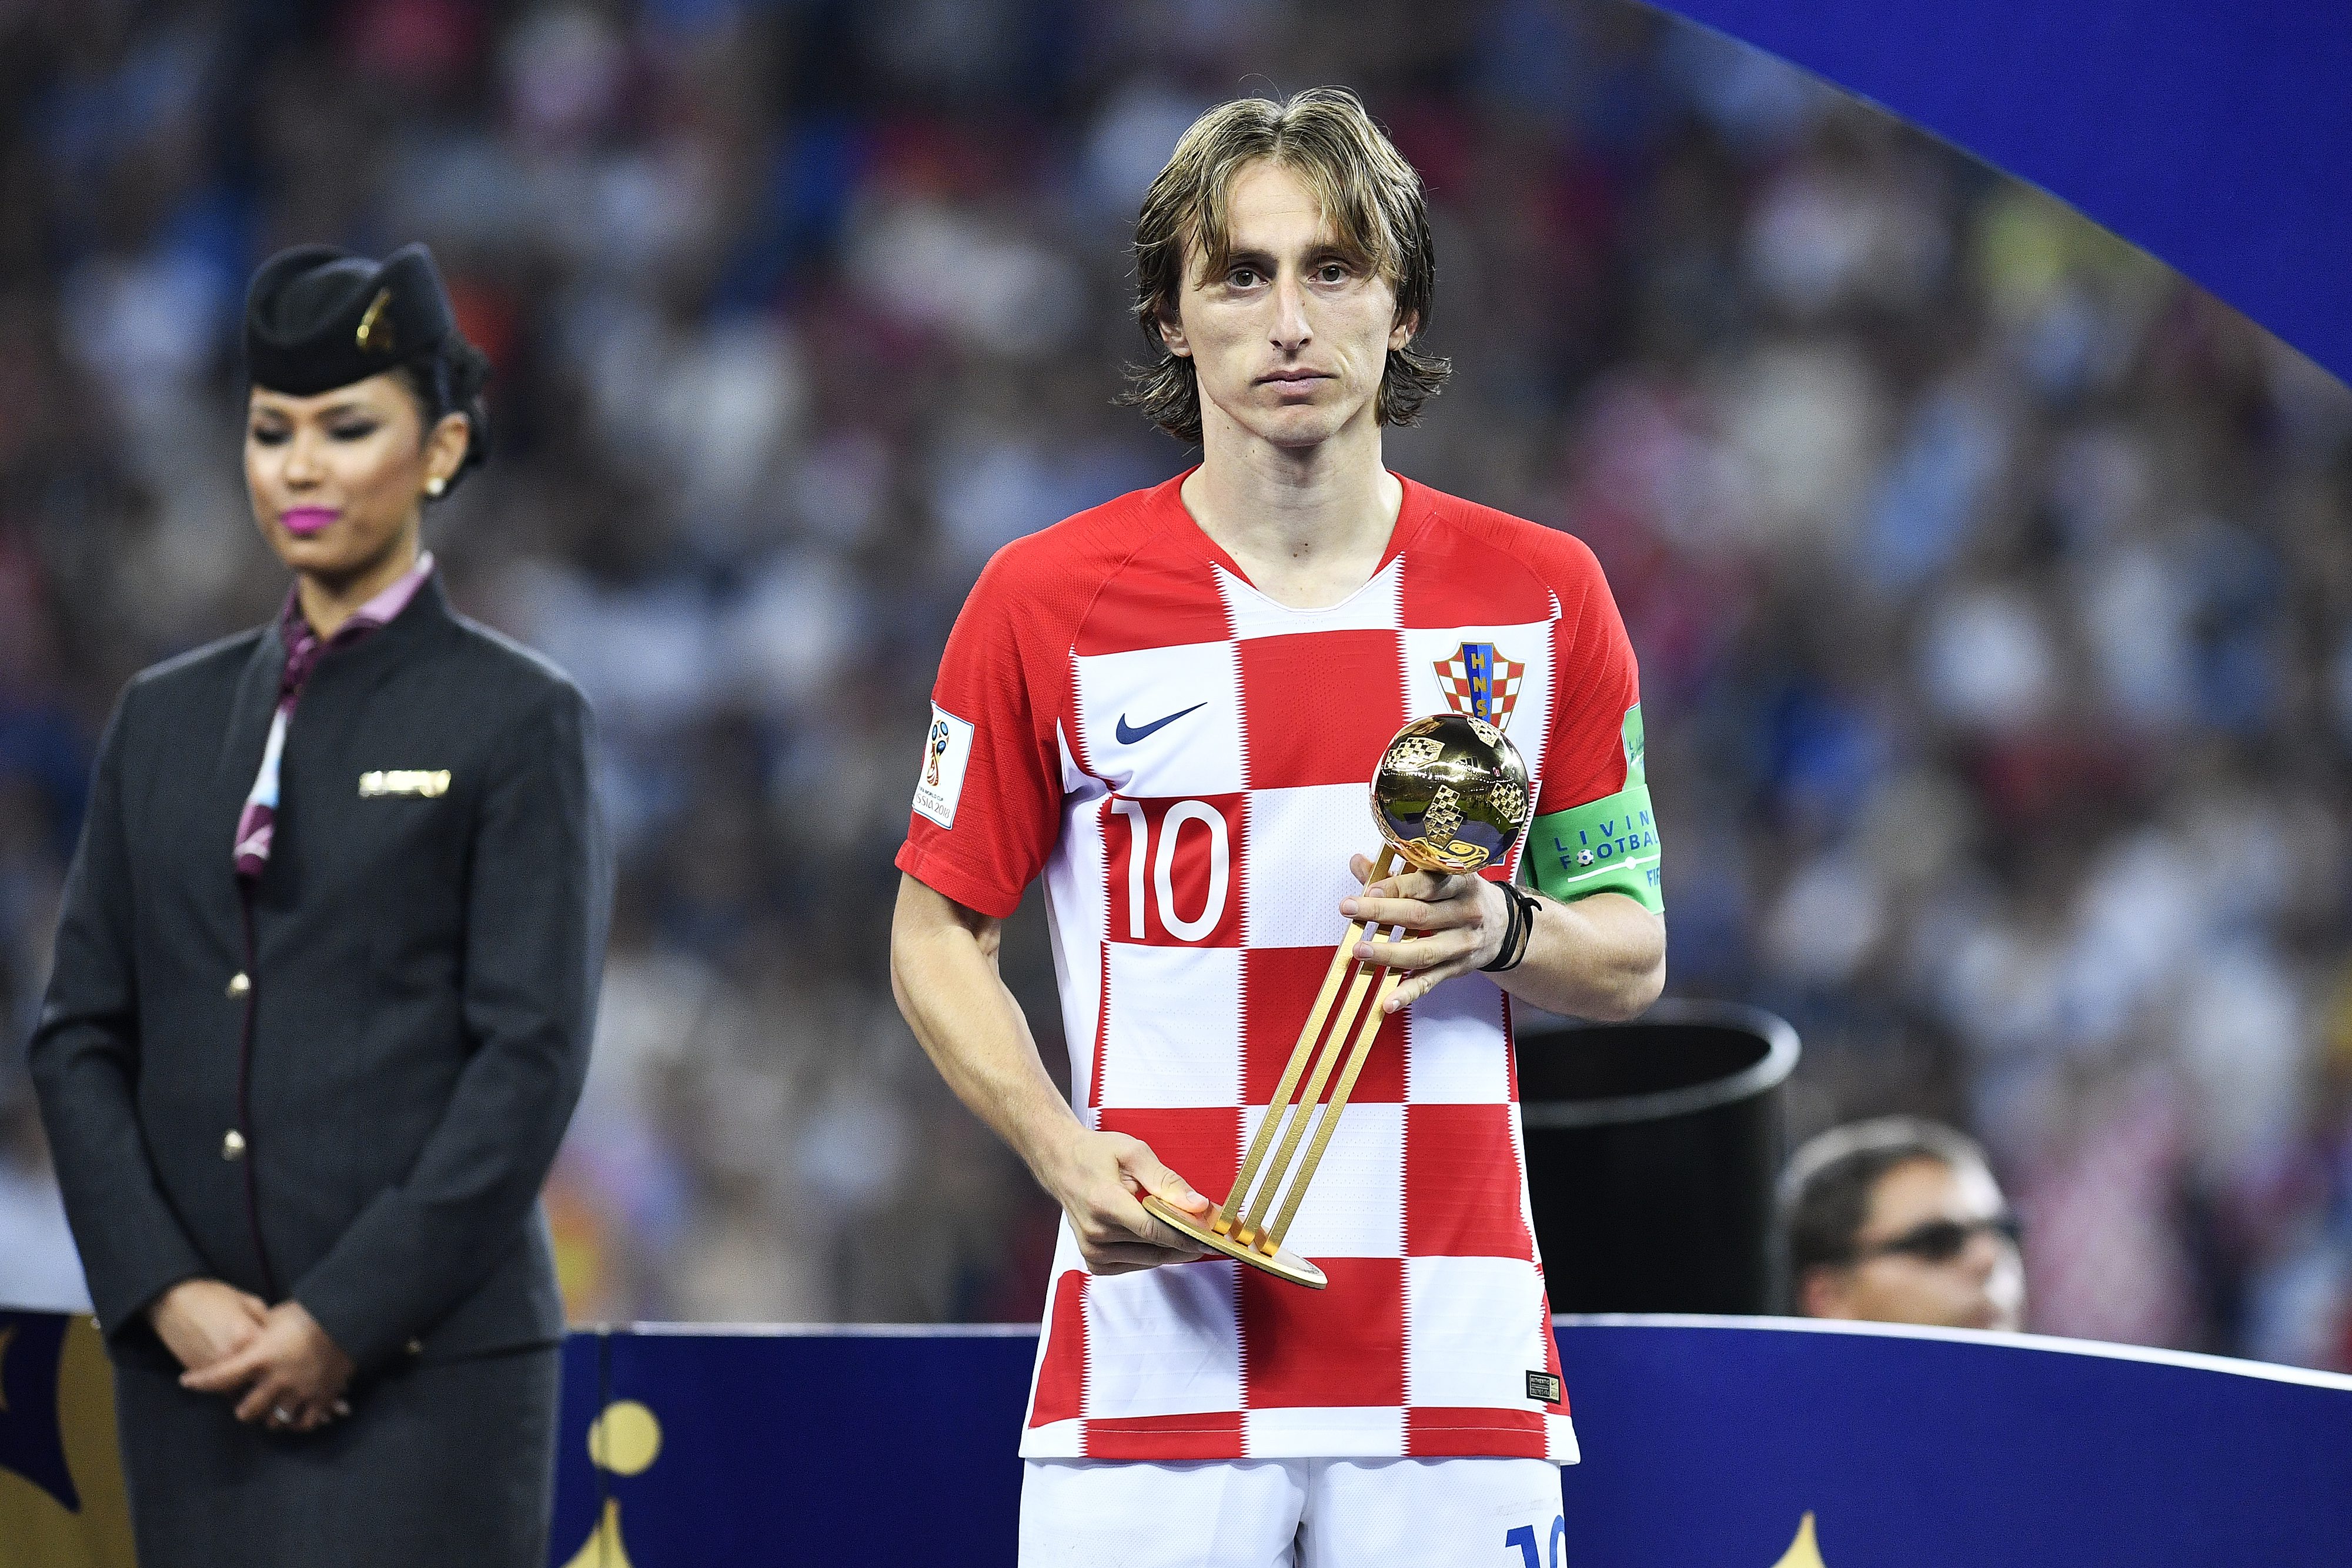 Luka Modric From Being a Shepherd to World's Best Soccer Player